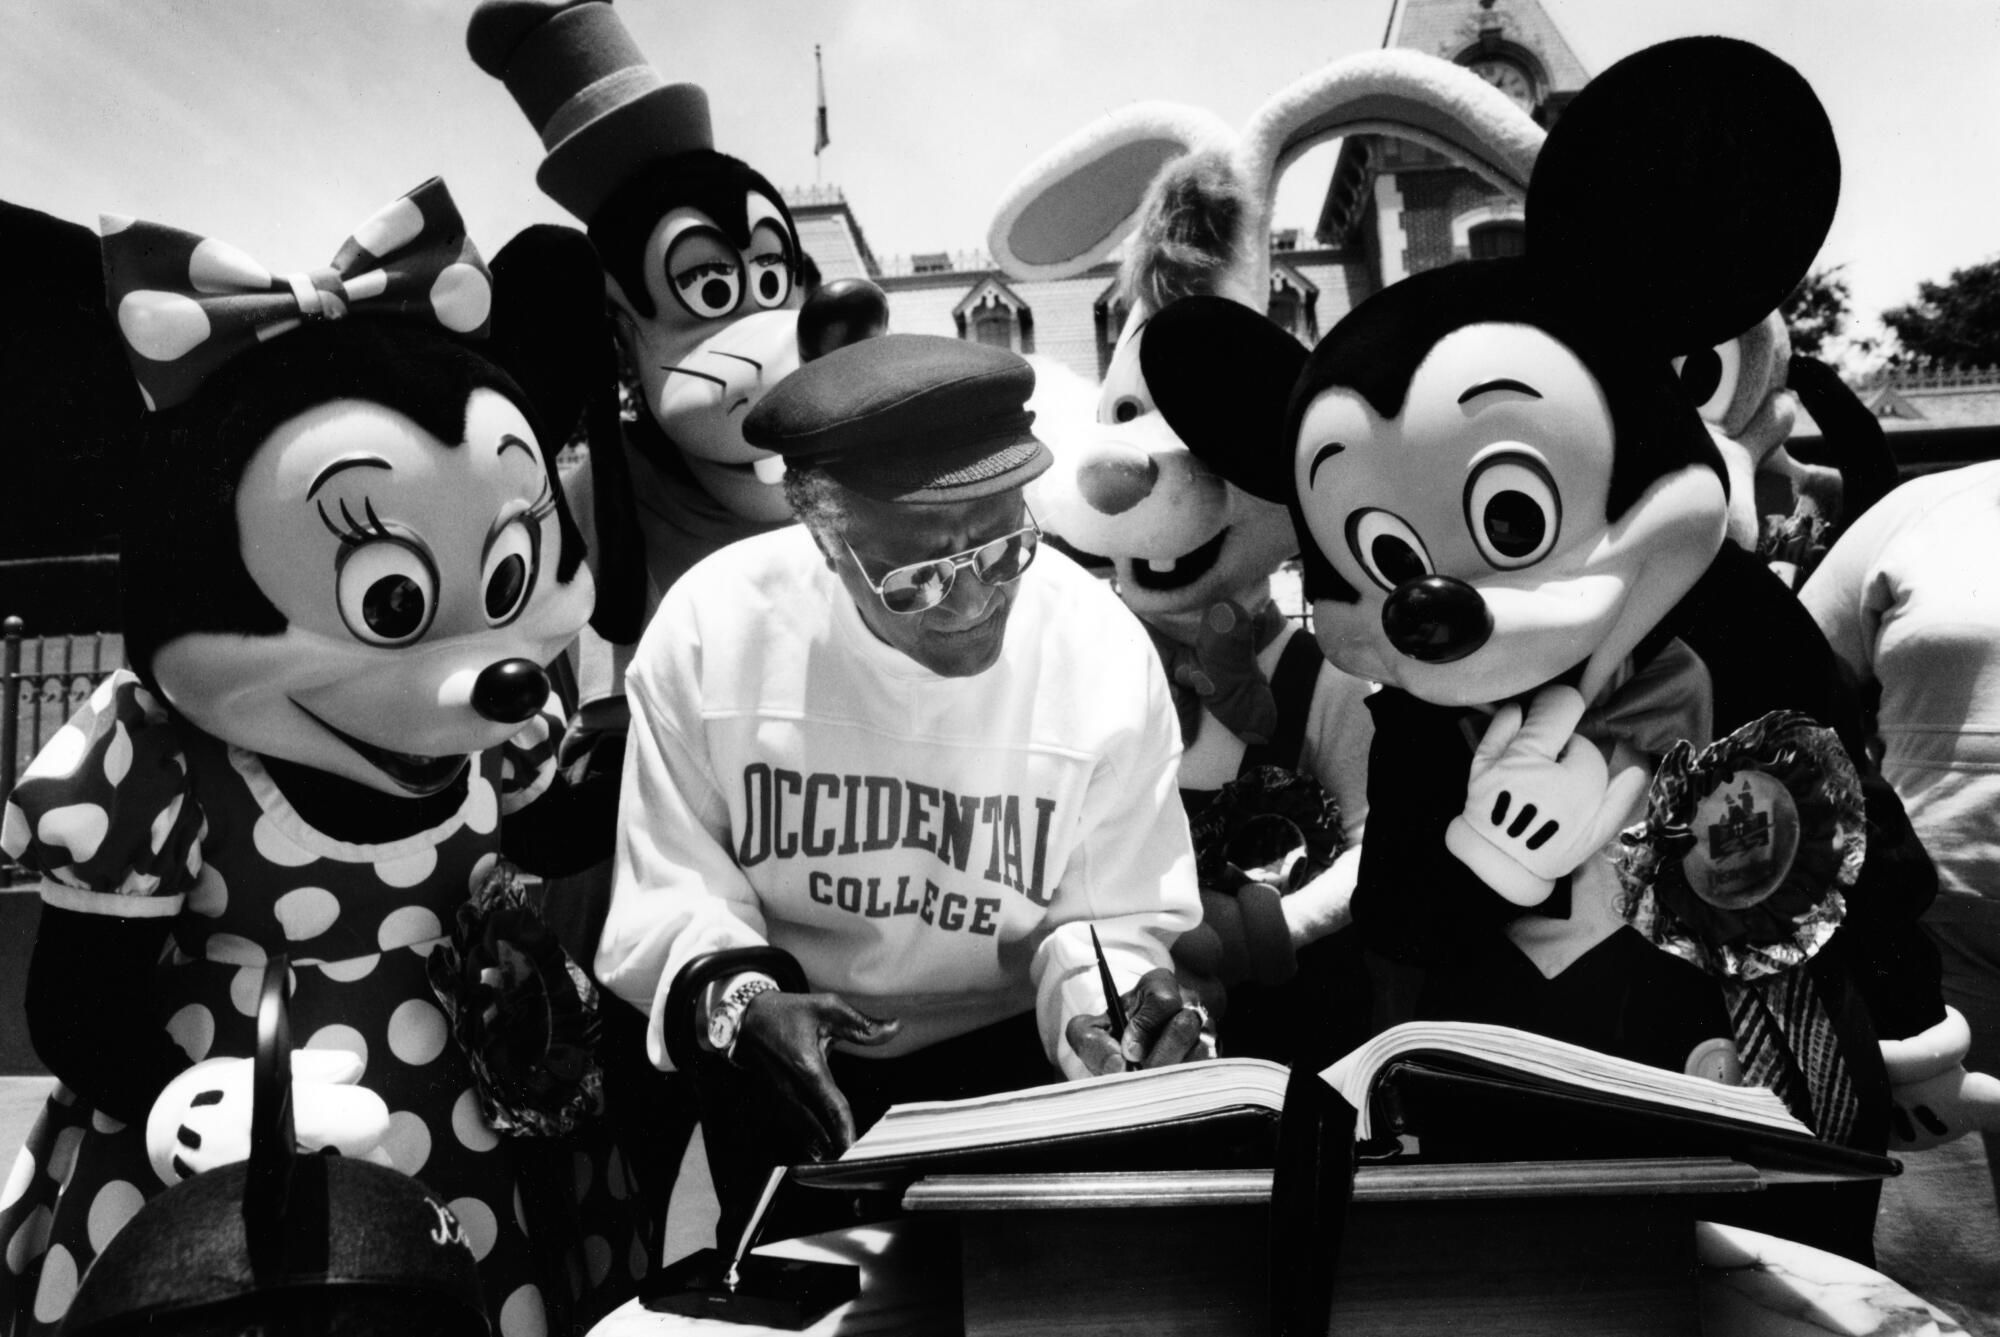 Archbishop Desmond Tutu, wearing an Occidental College sweatshirt, stands between Minnie and Mickey Mouse.